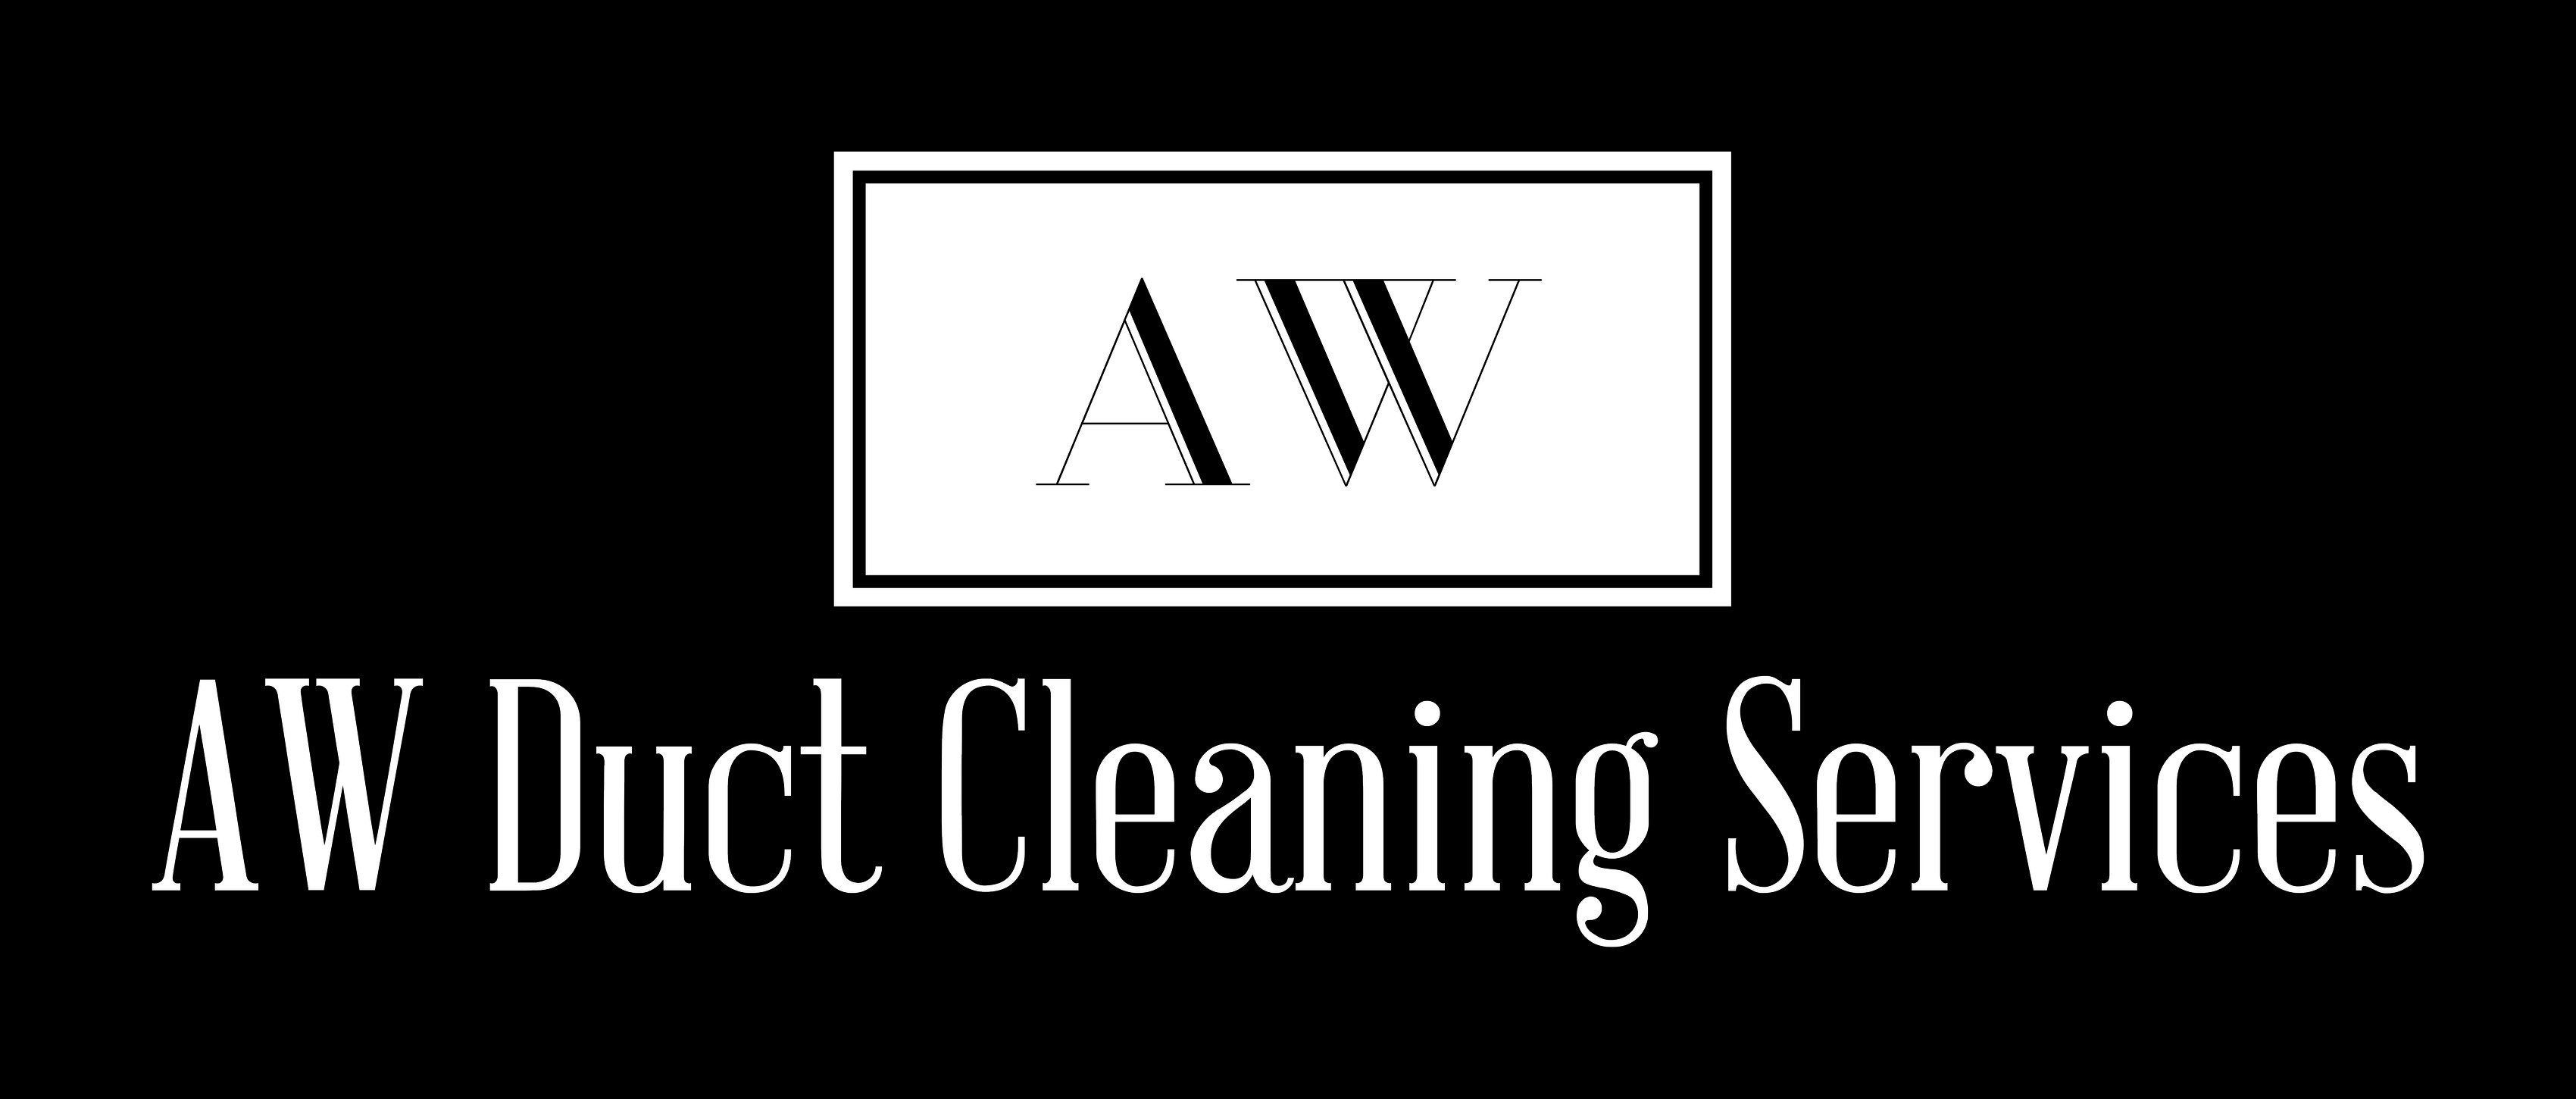 AW Duct Cleaning Services Logo